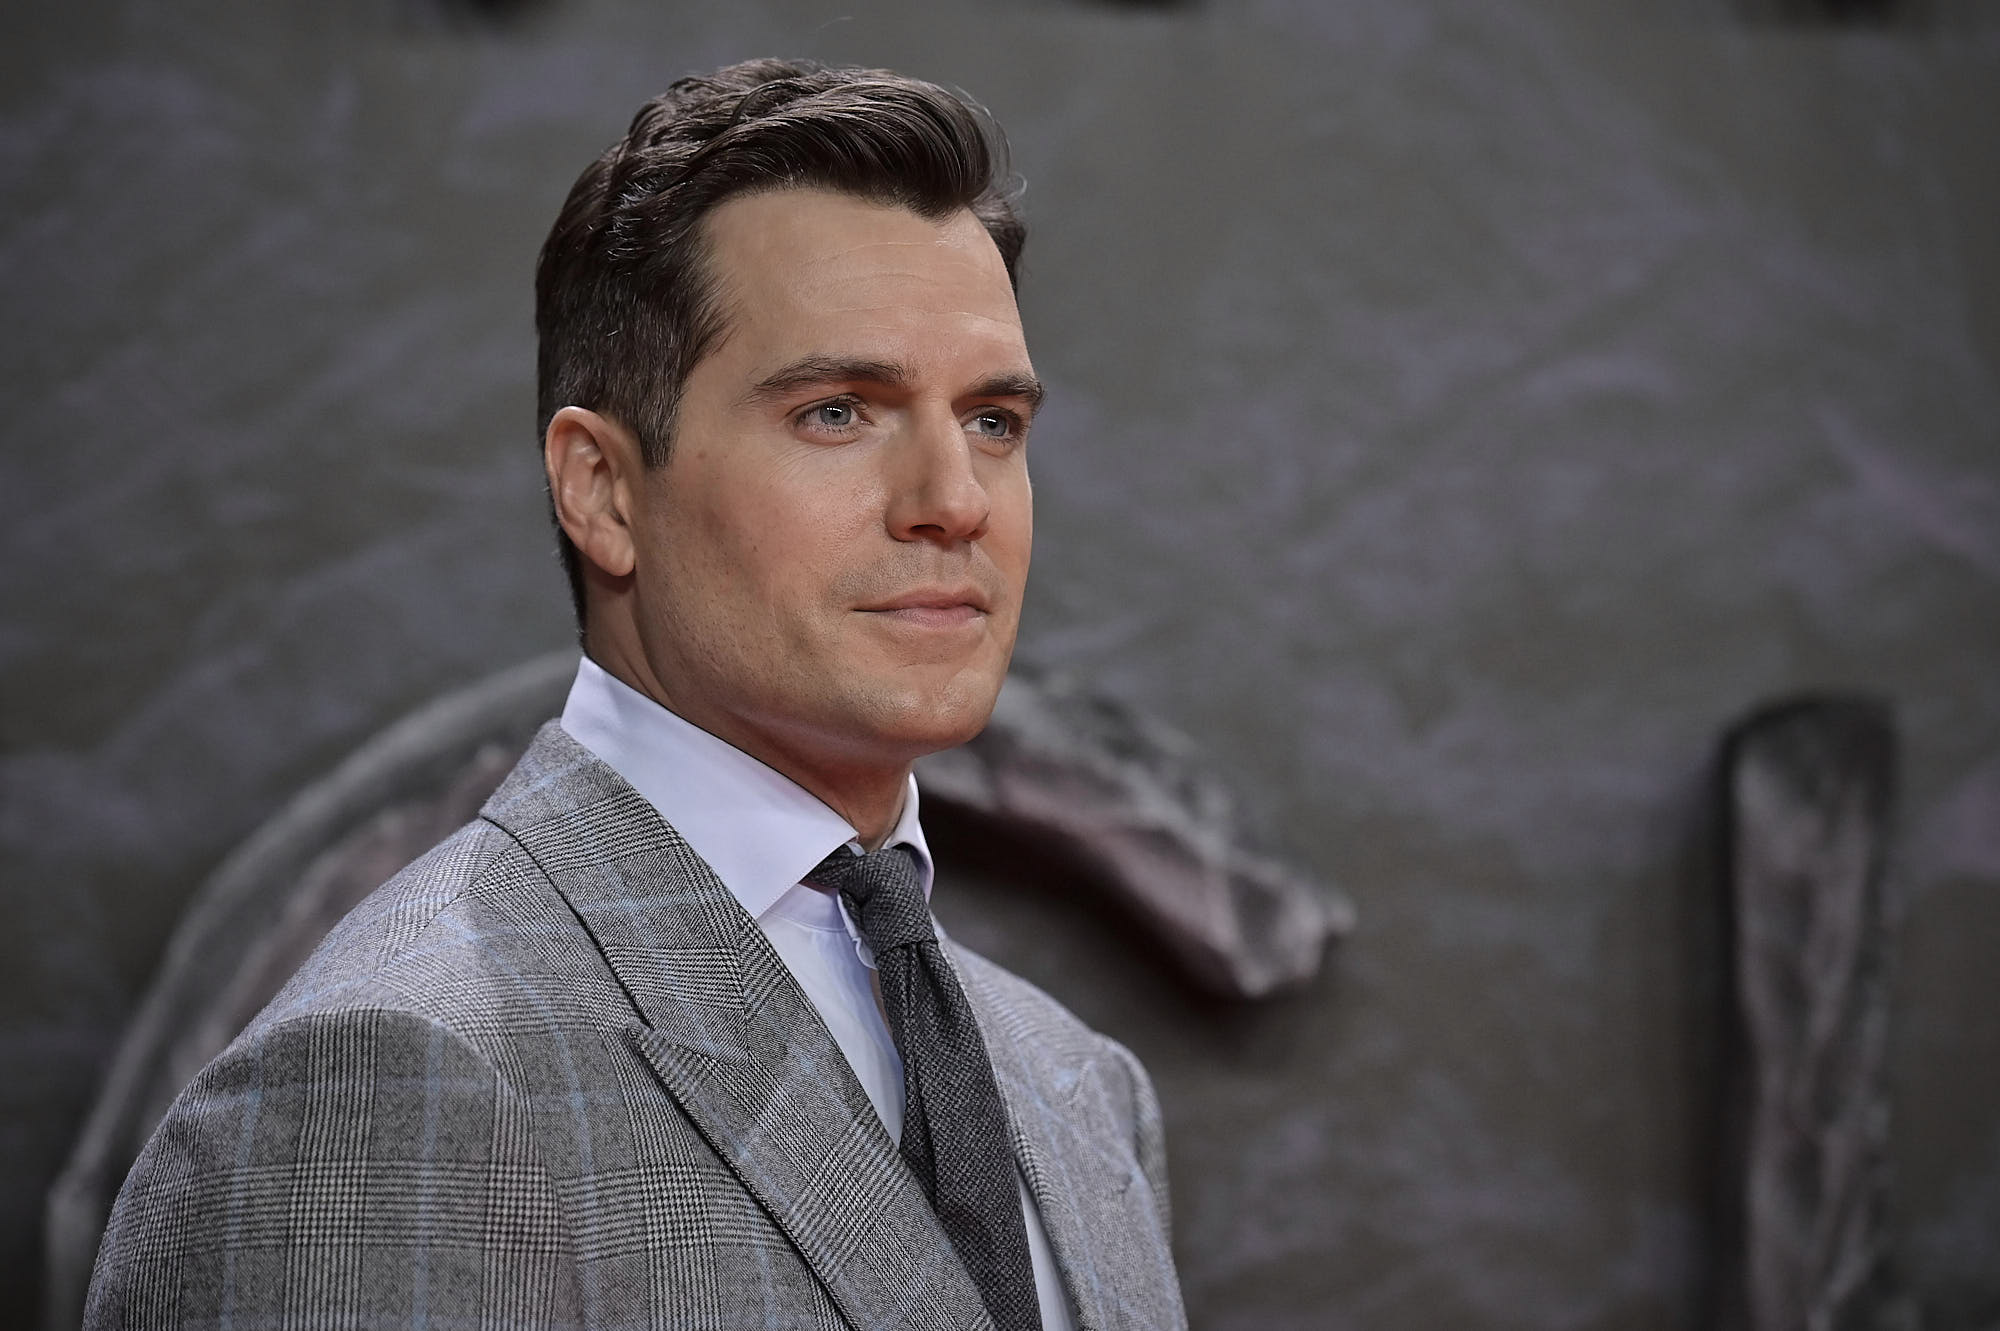 Possible James Bond actor Henry Cavill attends the season 2 premiere of The Witcher